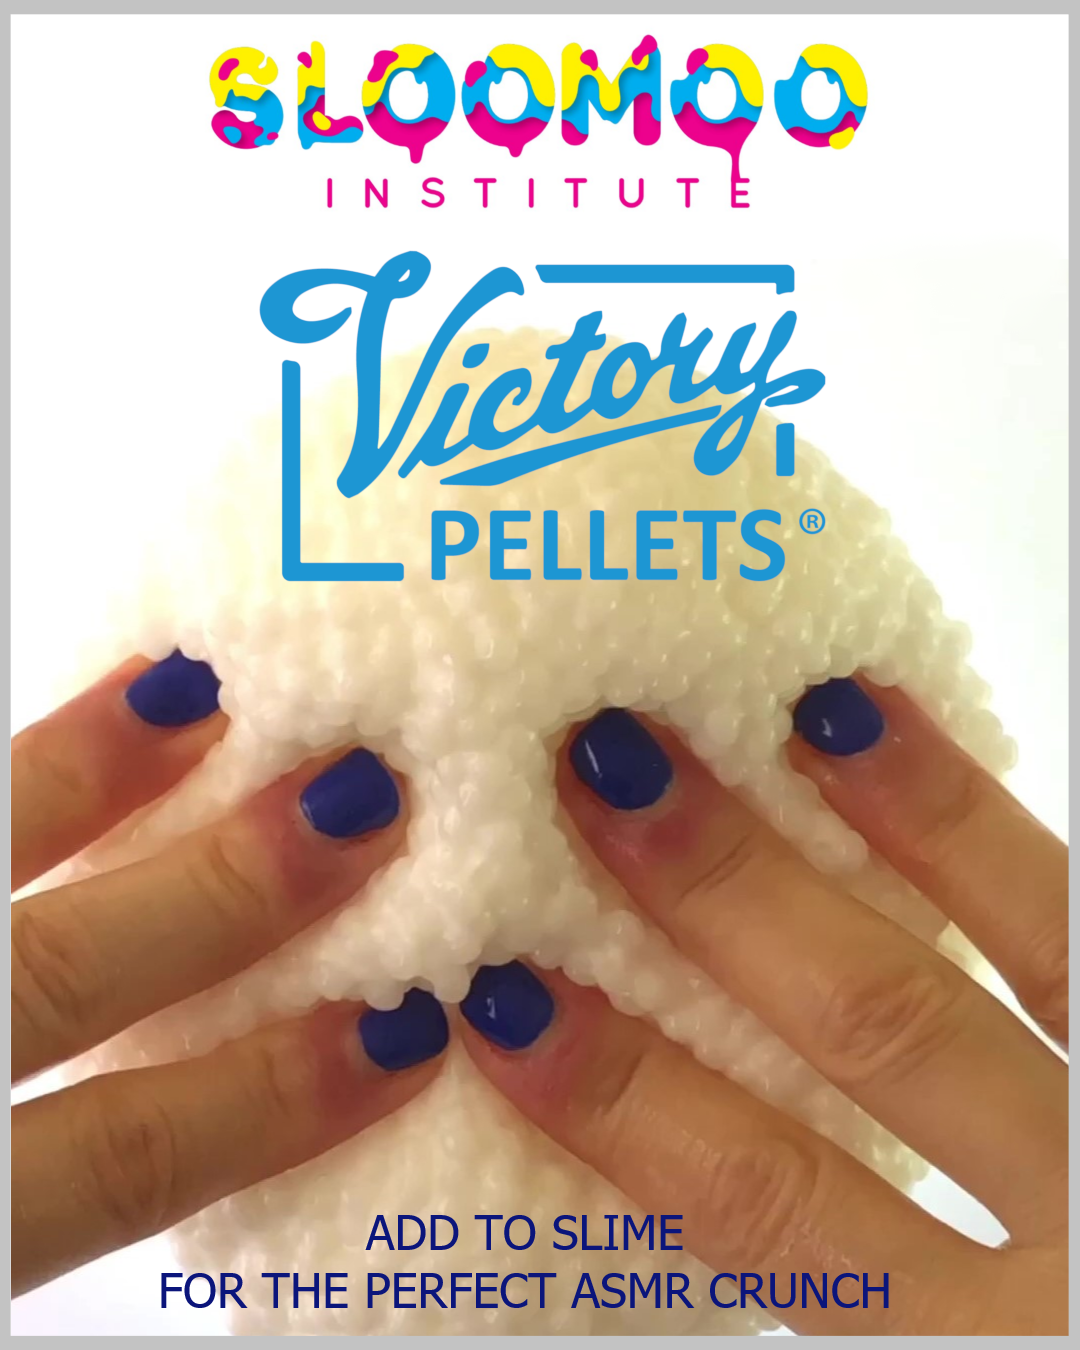  Victory Pellets 5 LBS Craft Filler Beads. Made in U.S.A. :  Arts, Crafts & Sewing